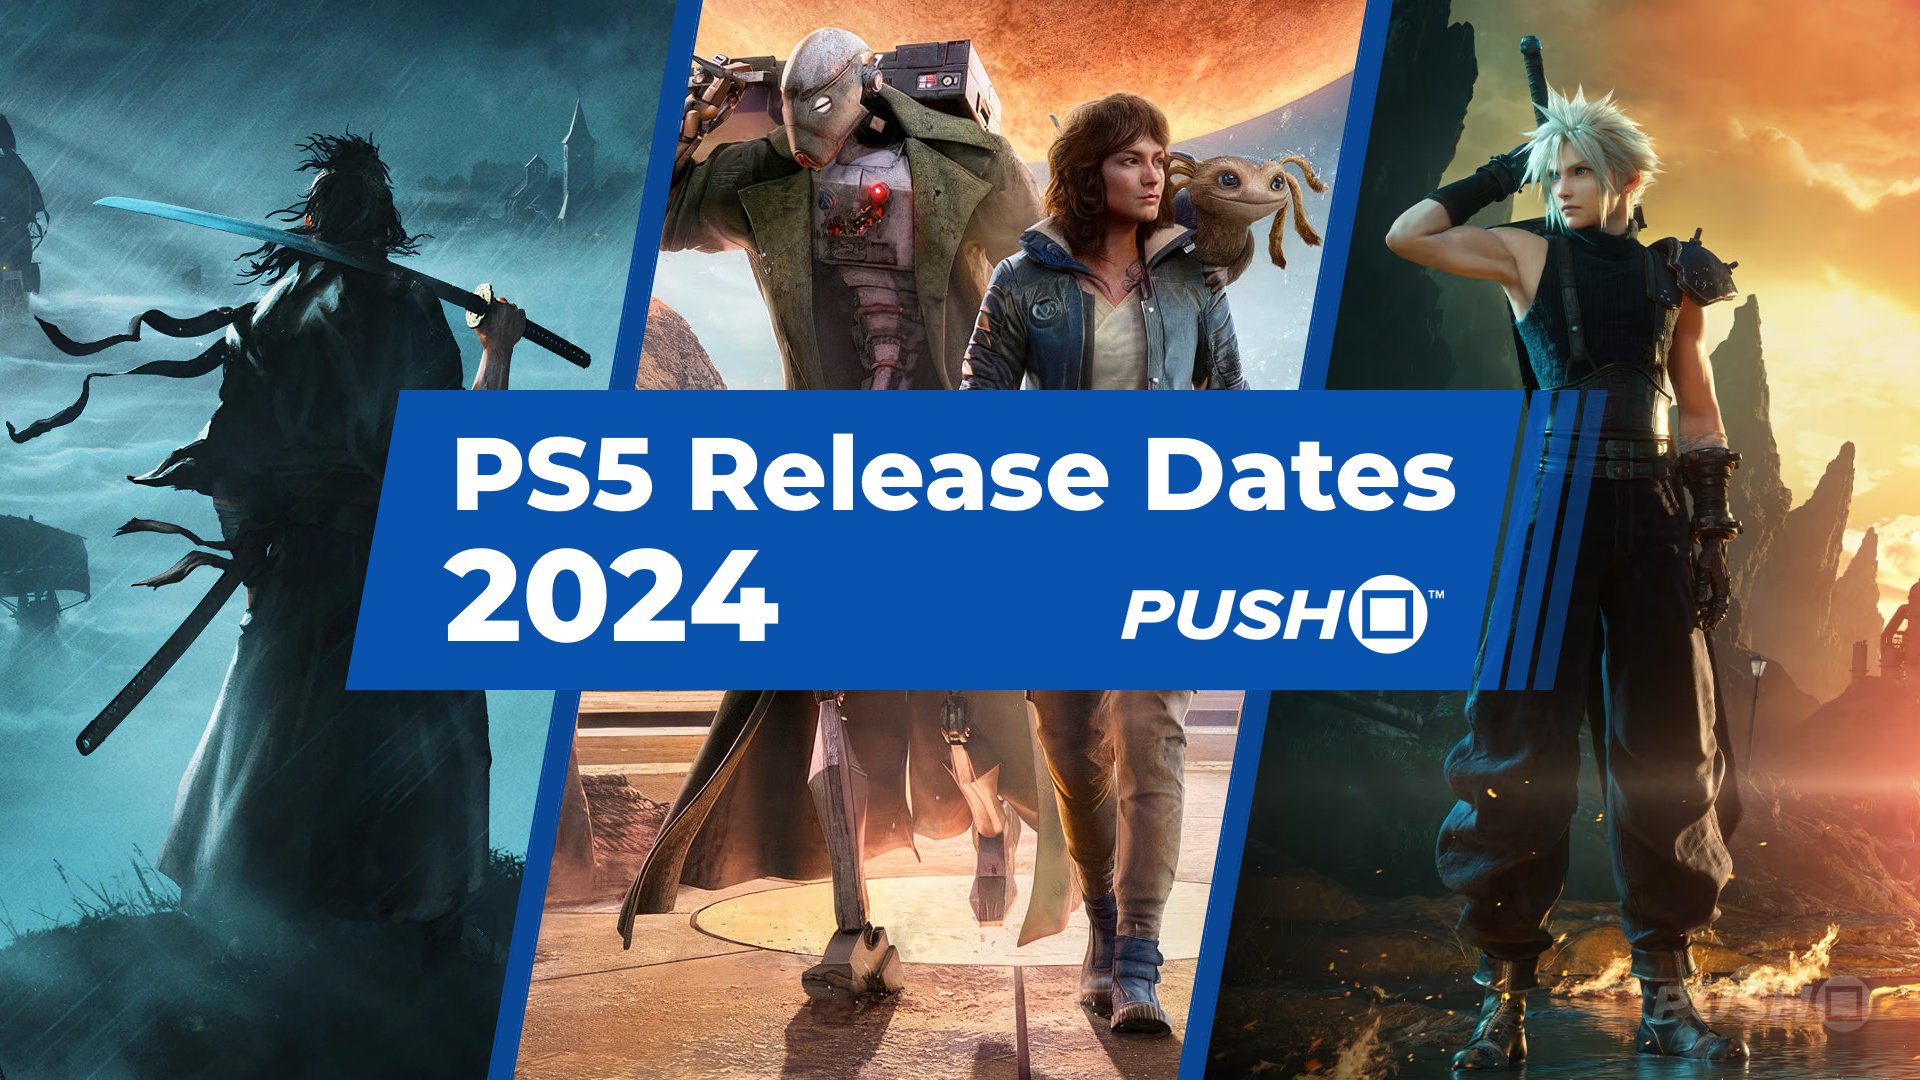 ps5 games coming